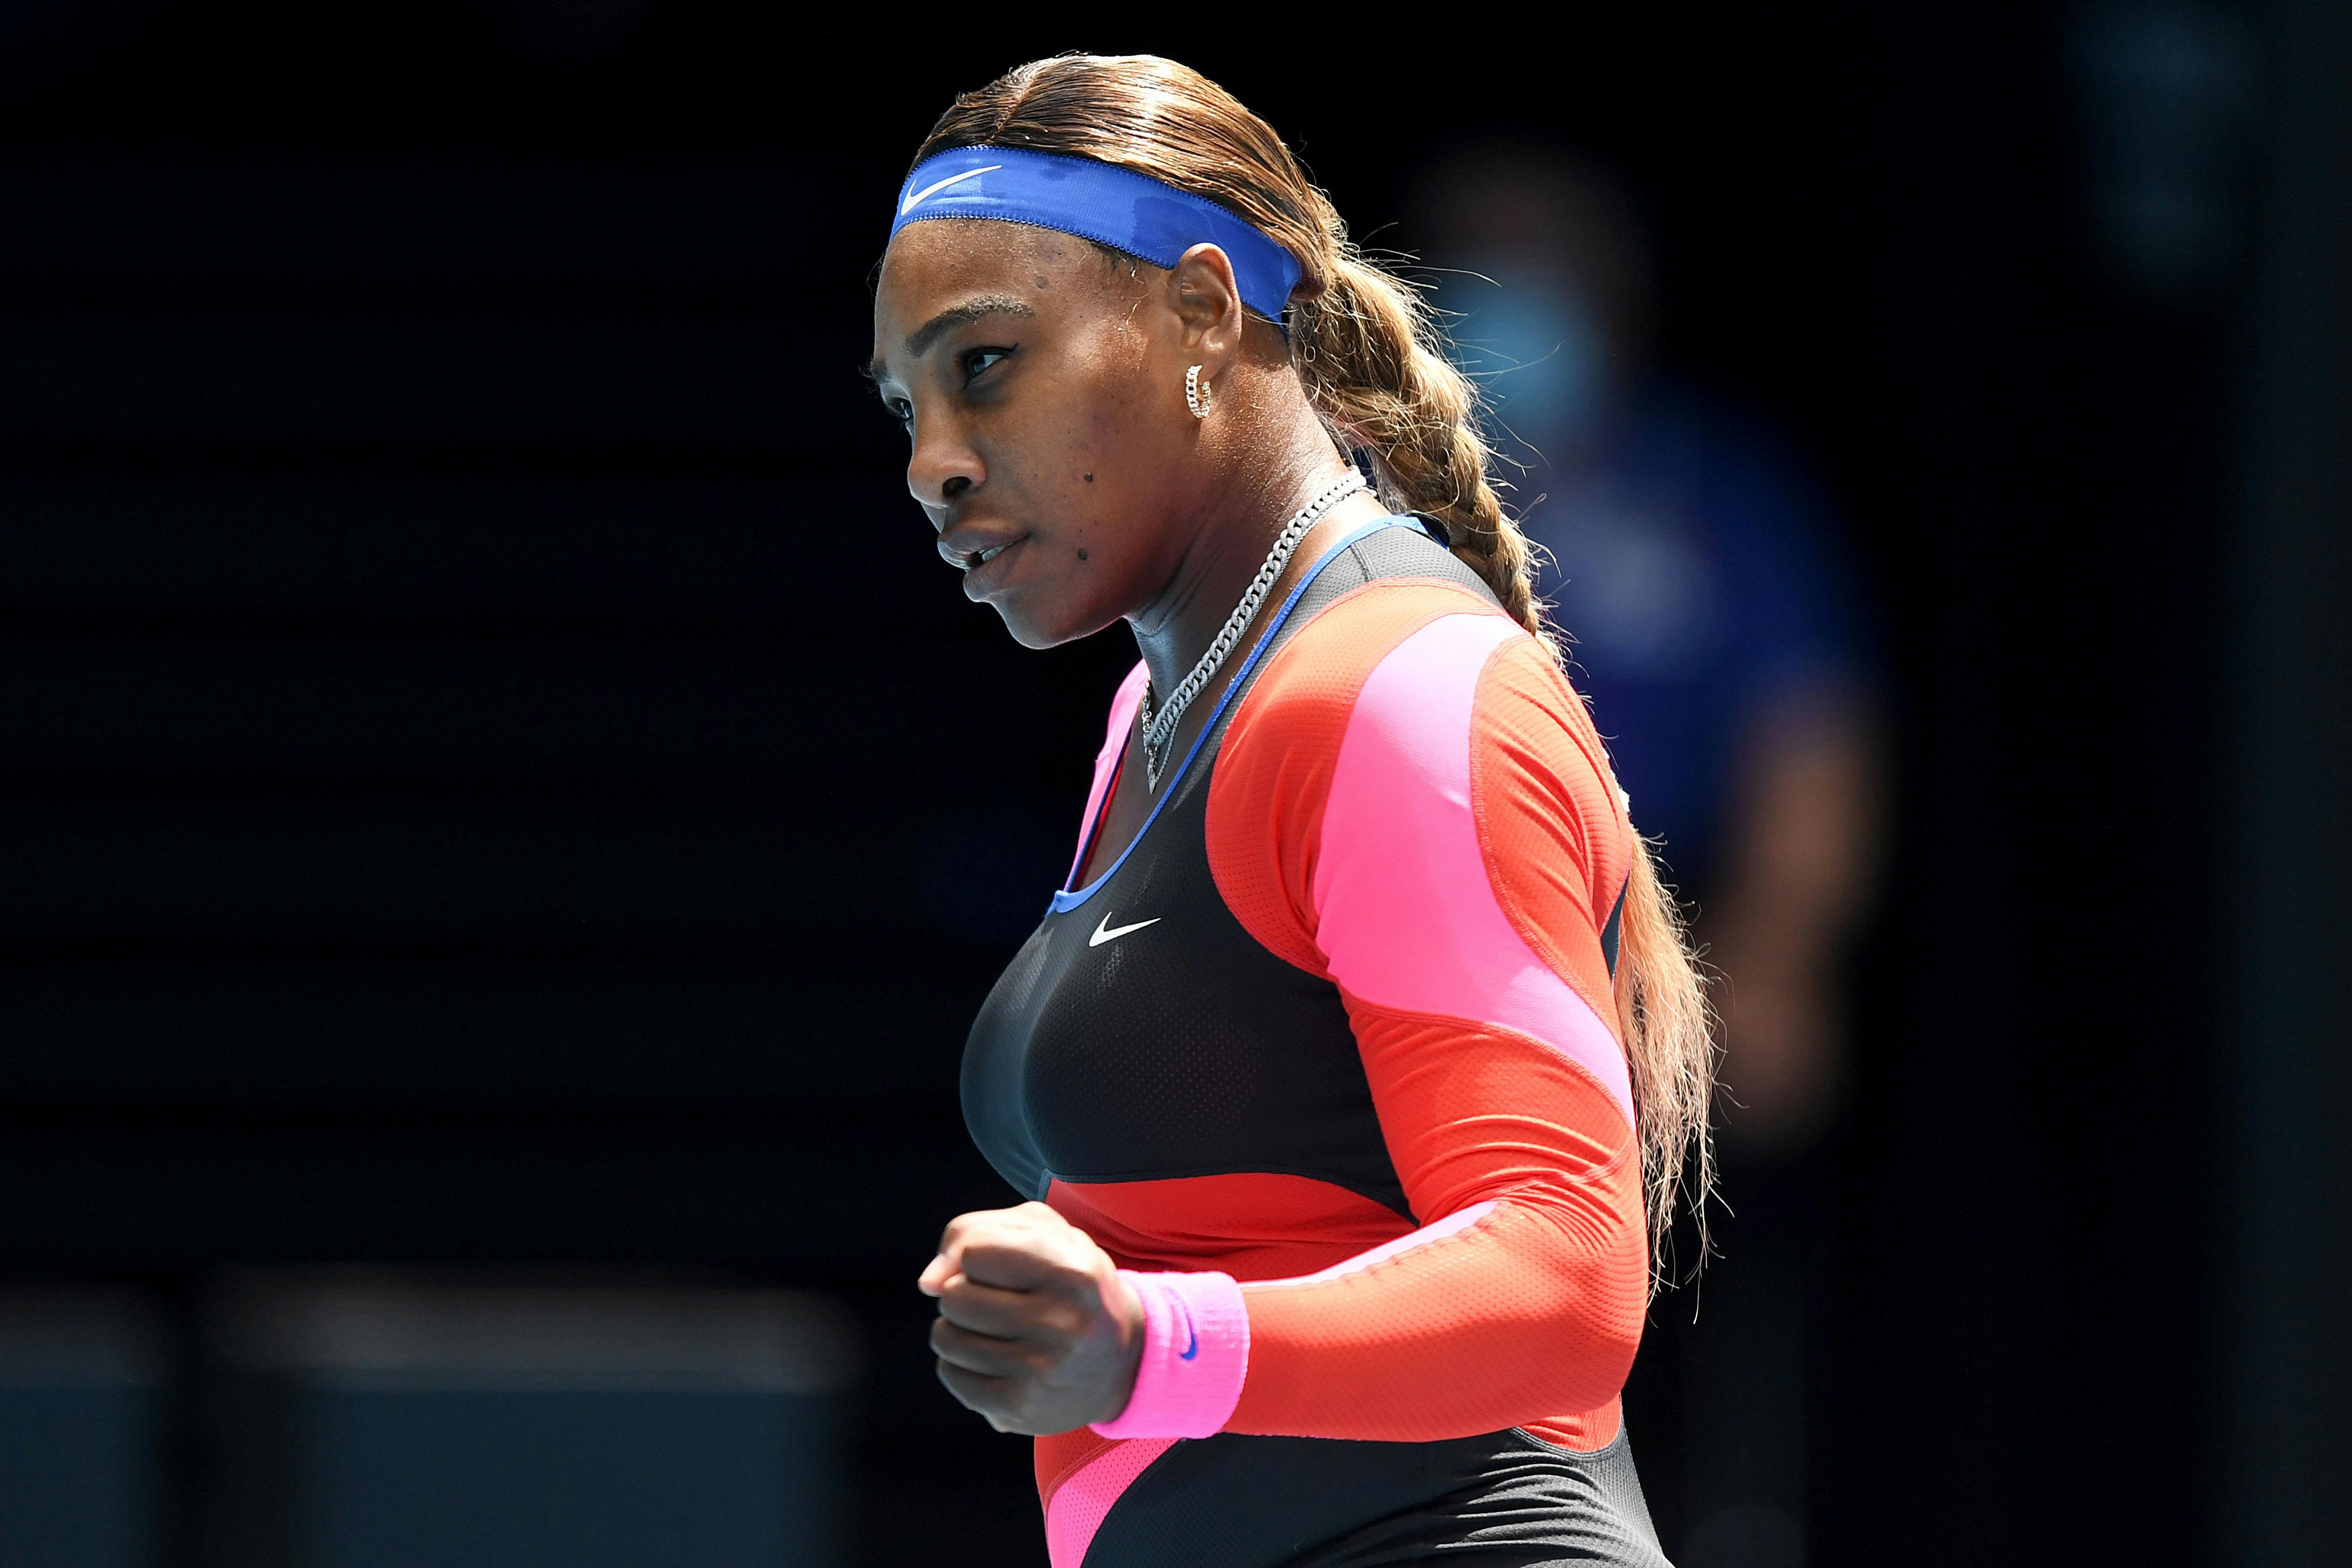 Serena Williams fist pumping during her match against Aryna Sabalenka at the 2021 Australian Open